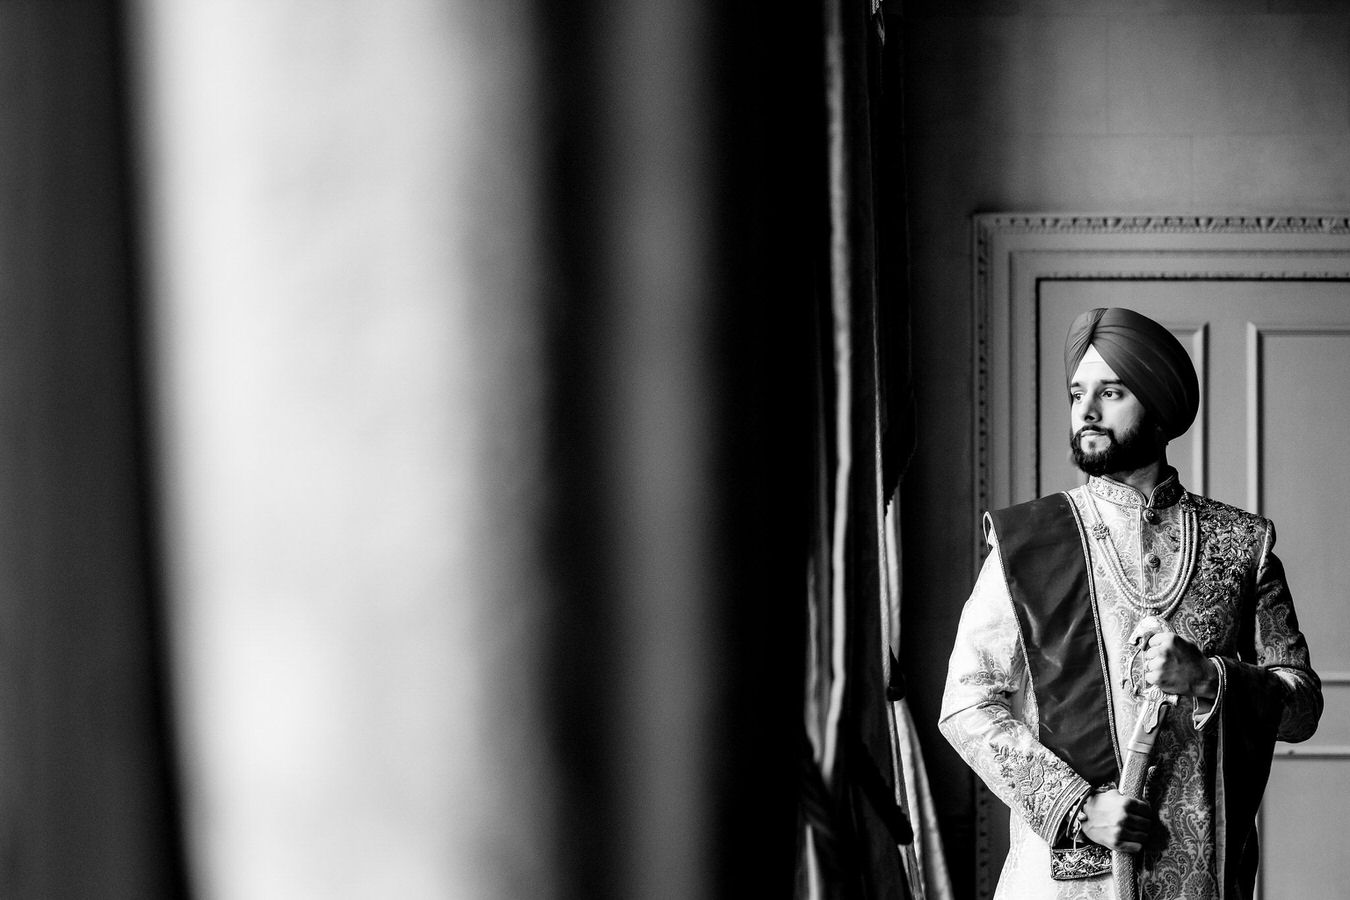 Sikh wedding black and white photography of a groom with kirpan in his hands and a turban looking at his right.